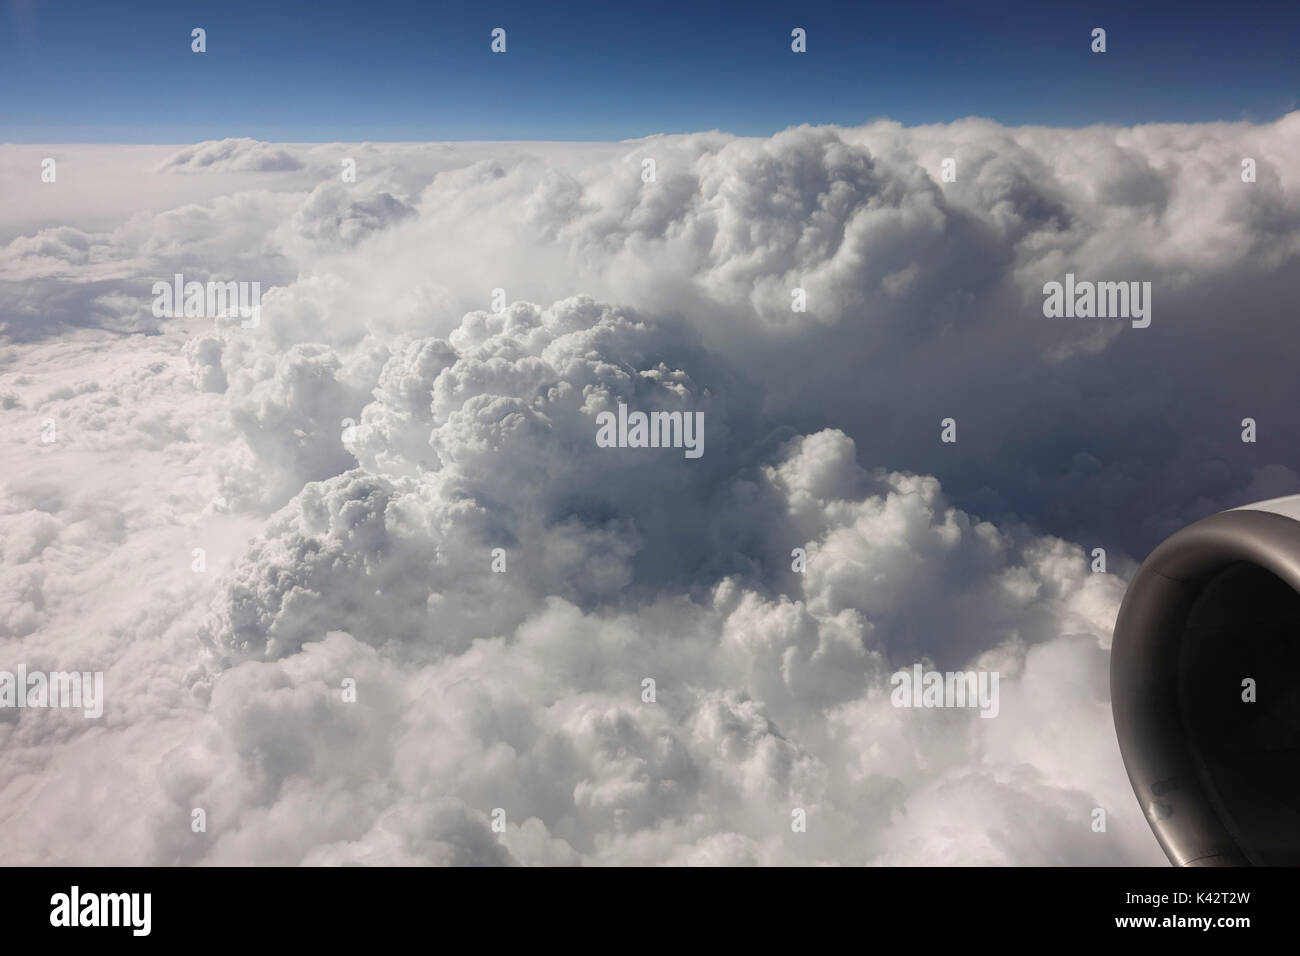 Motor of an airplane seen from window, flying above clouds. Stock Photo